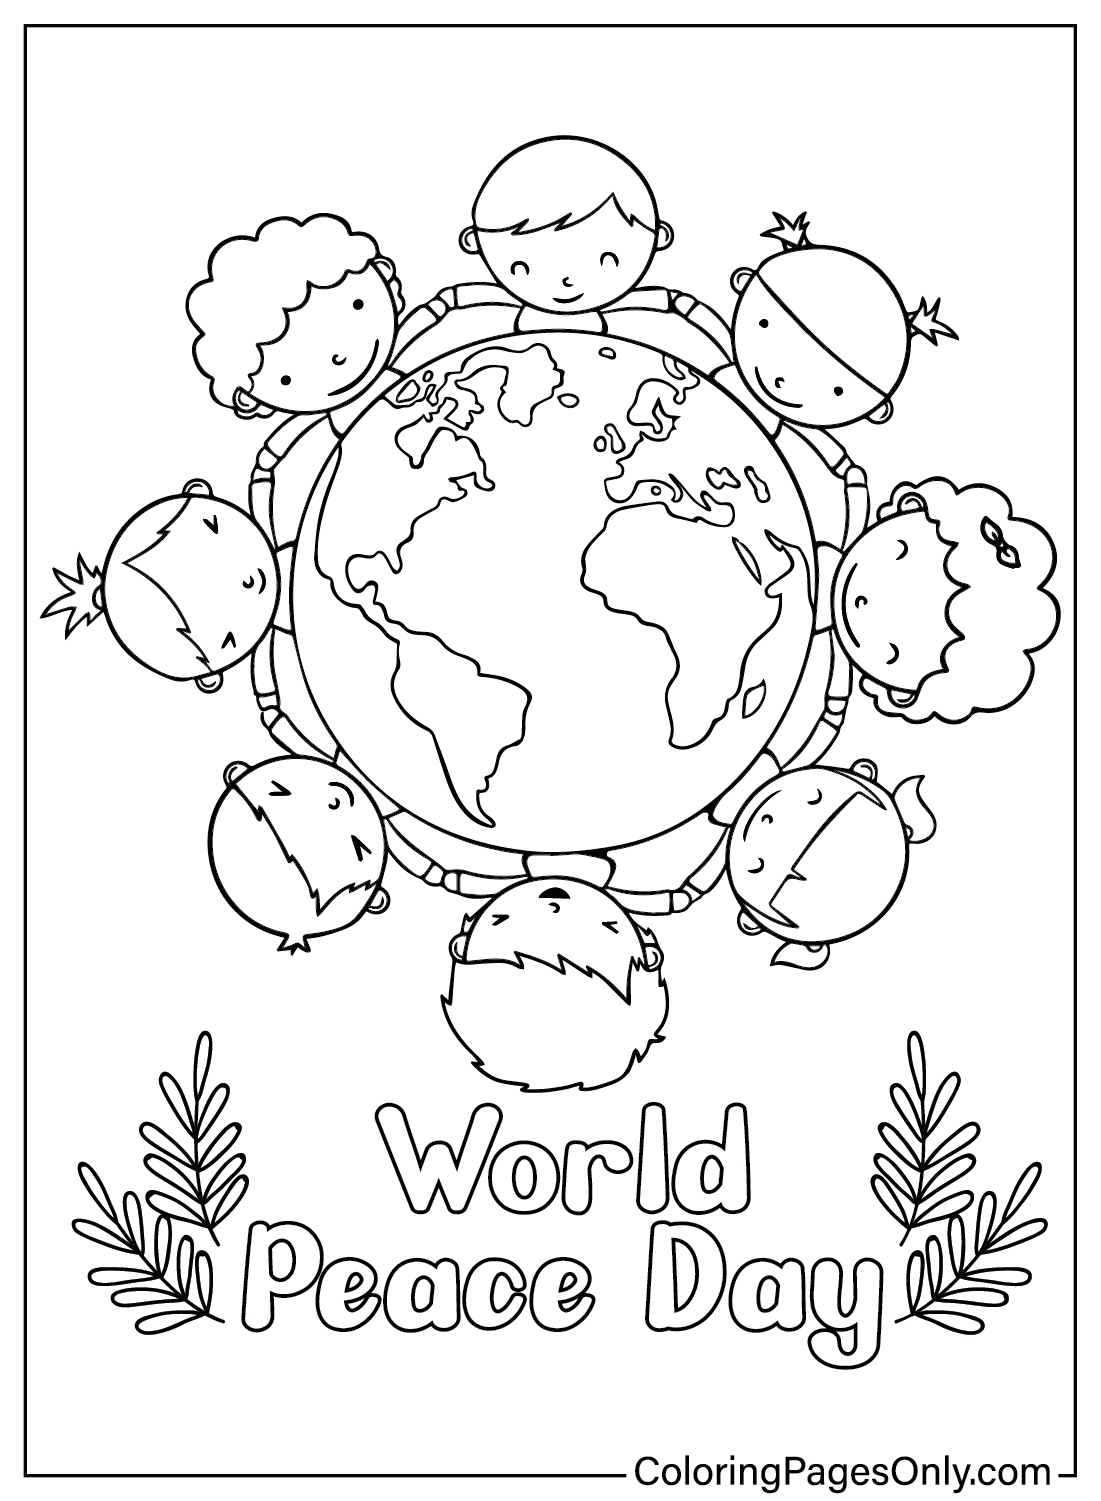 World Peace Day Coloring Page from International Day of Peace